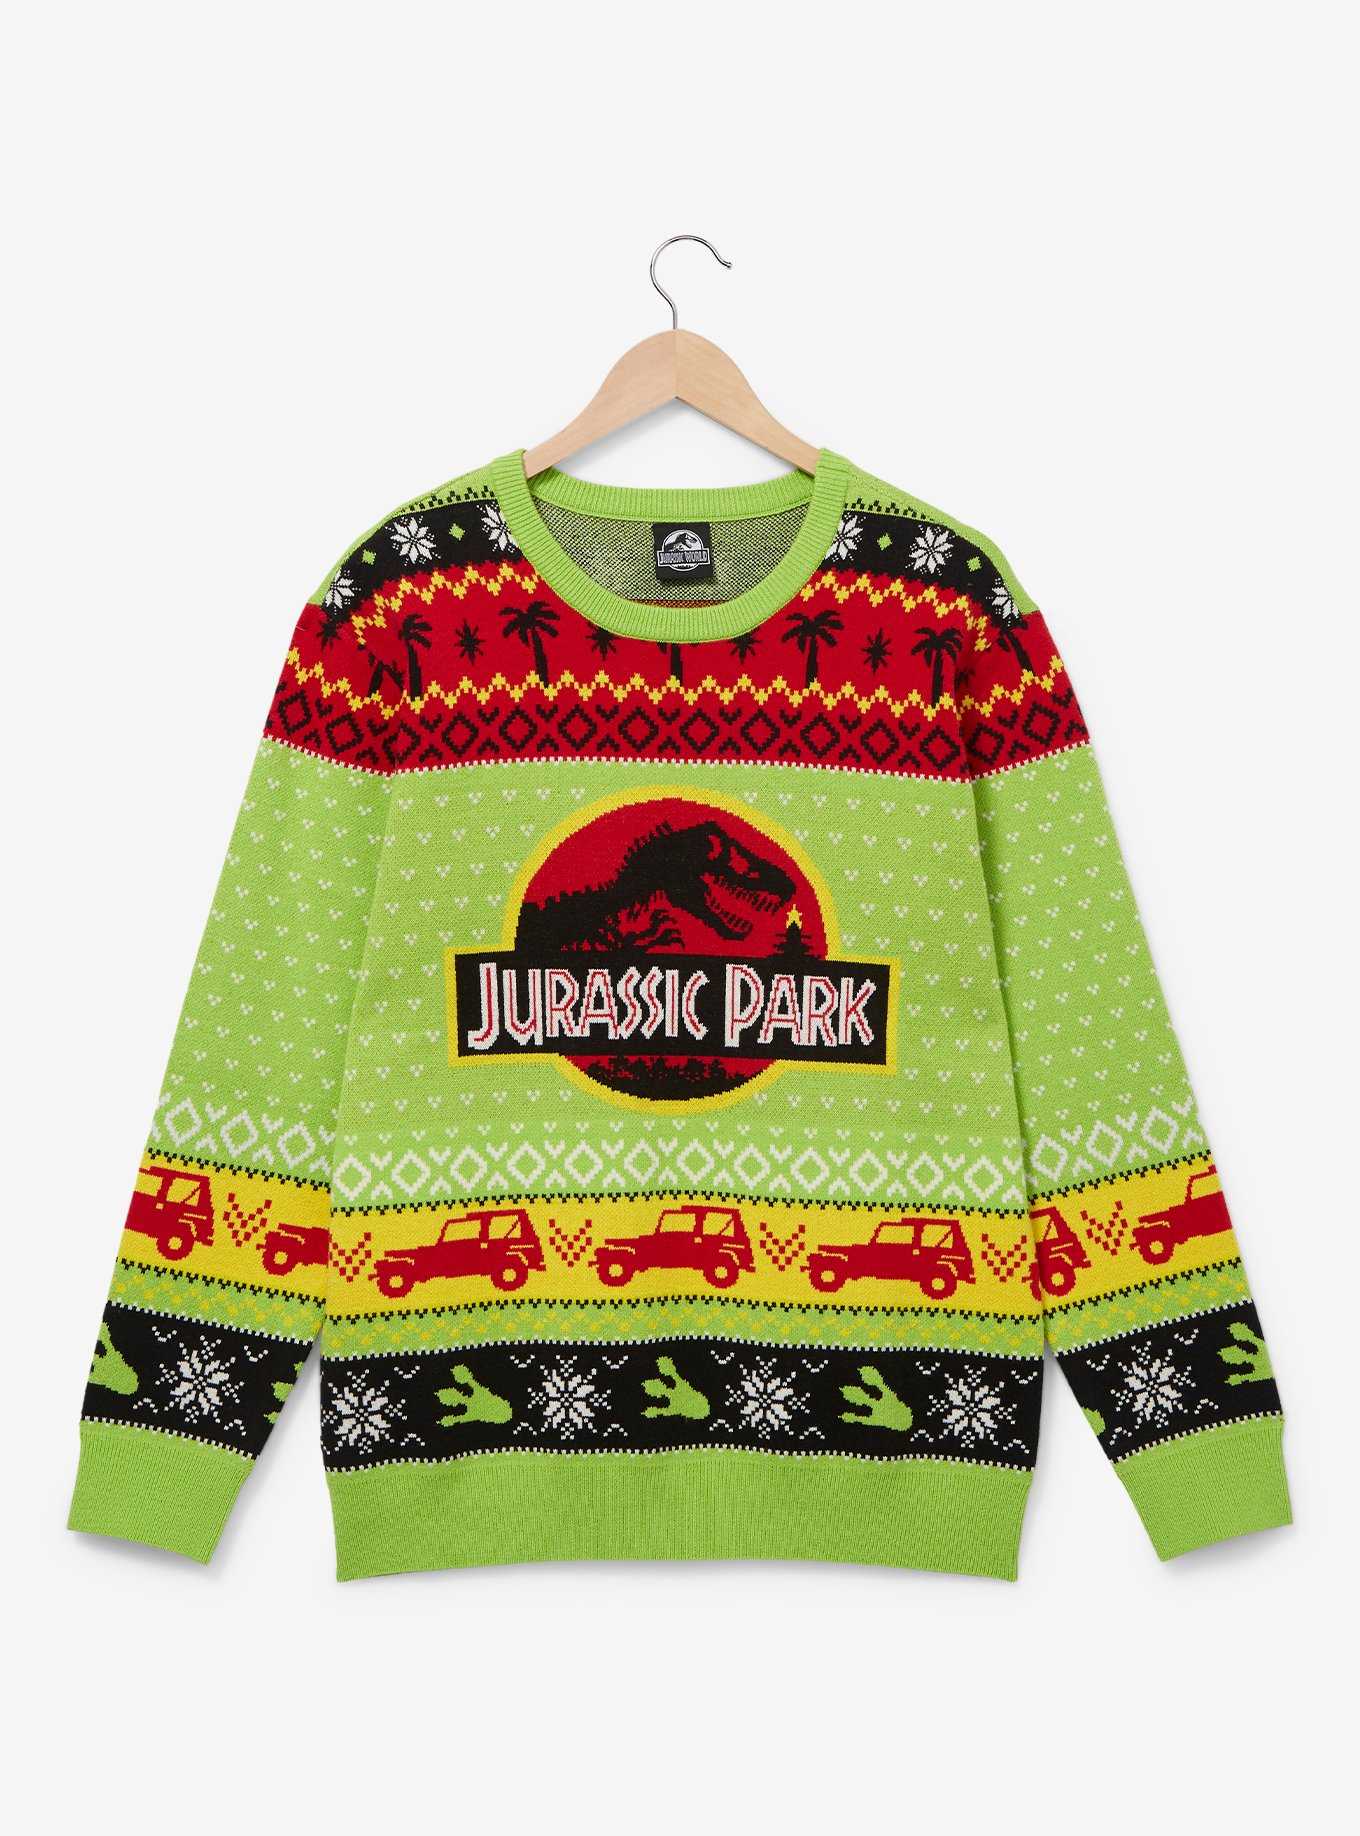 Jurassic Park Logo Patterned Holiday Sweater - BoxLunch Exclusive